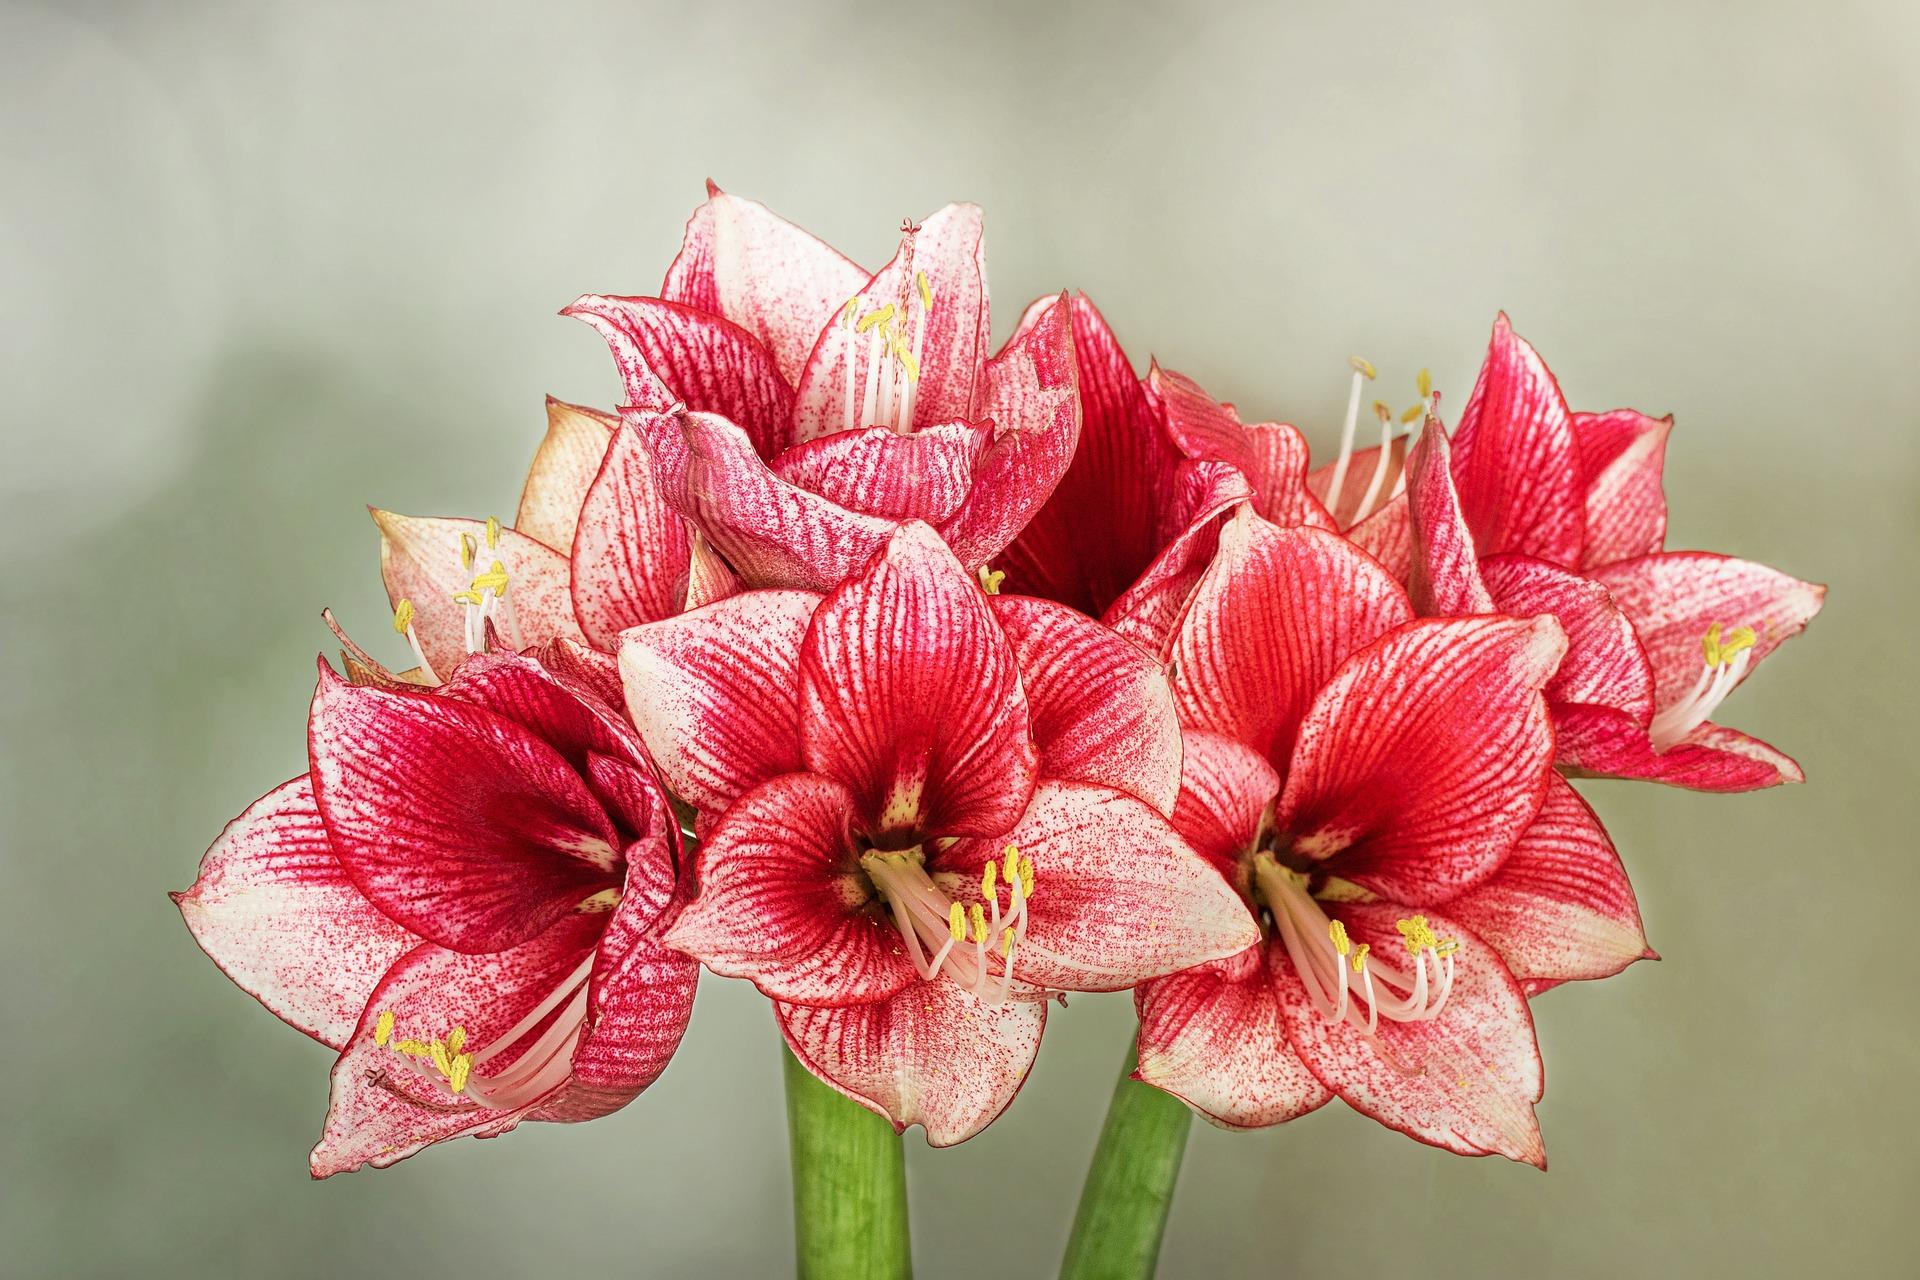 multiple red and white amaryllis flowers in bloom